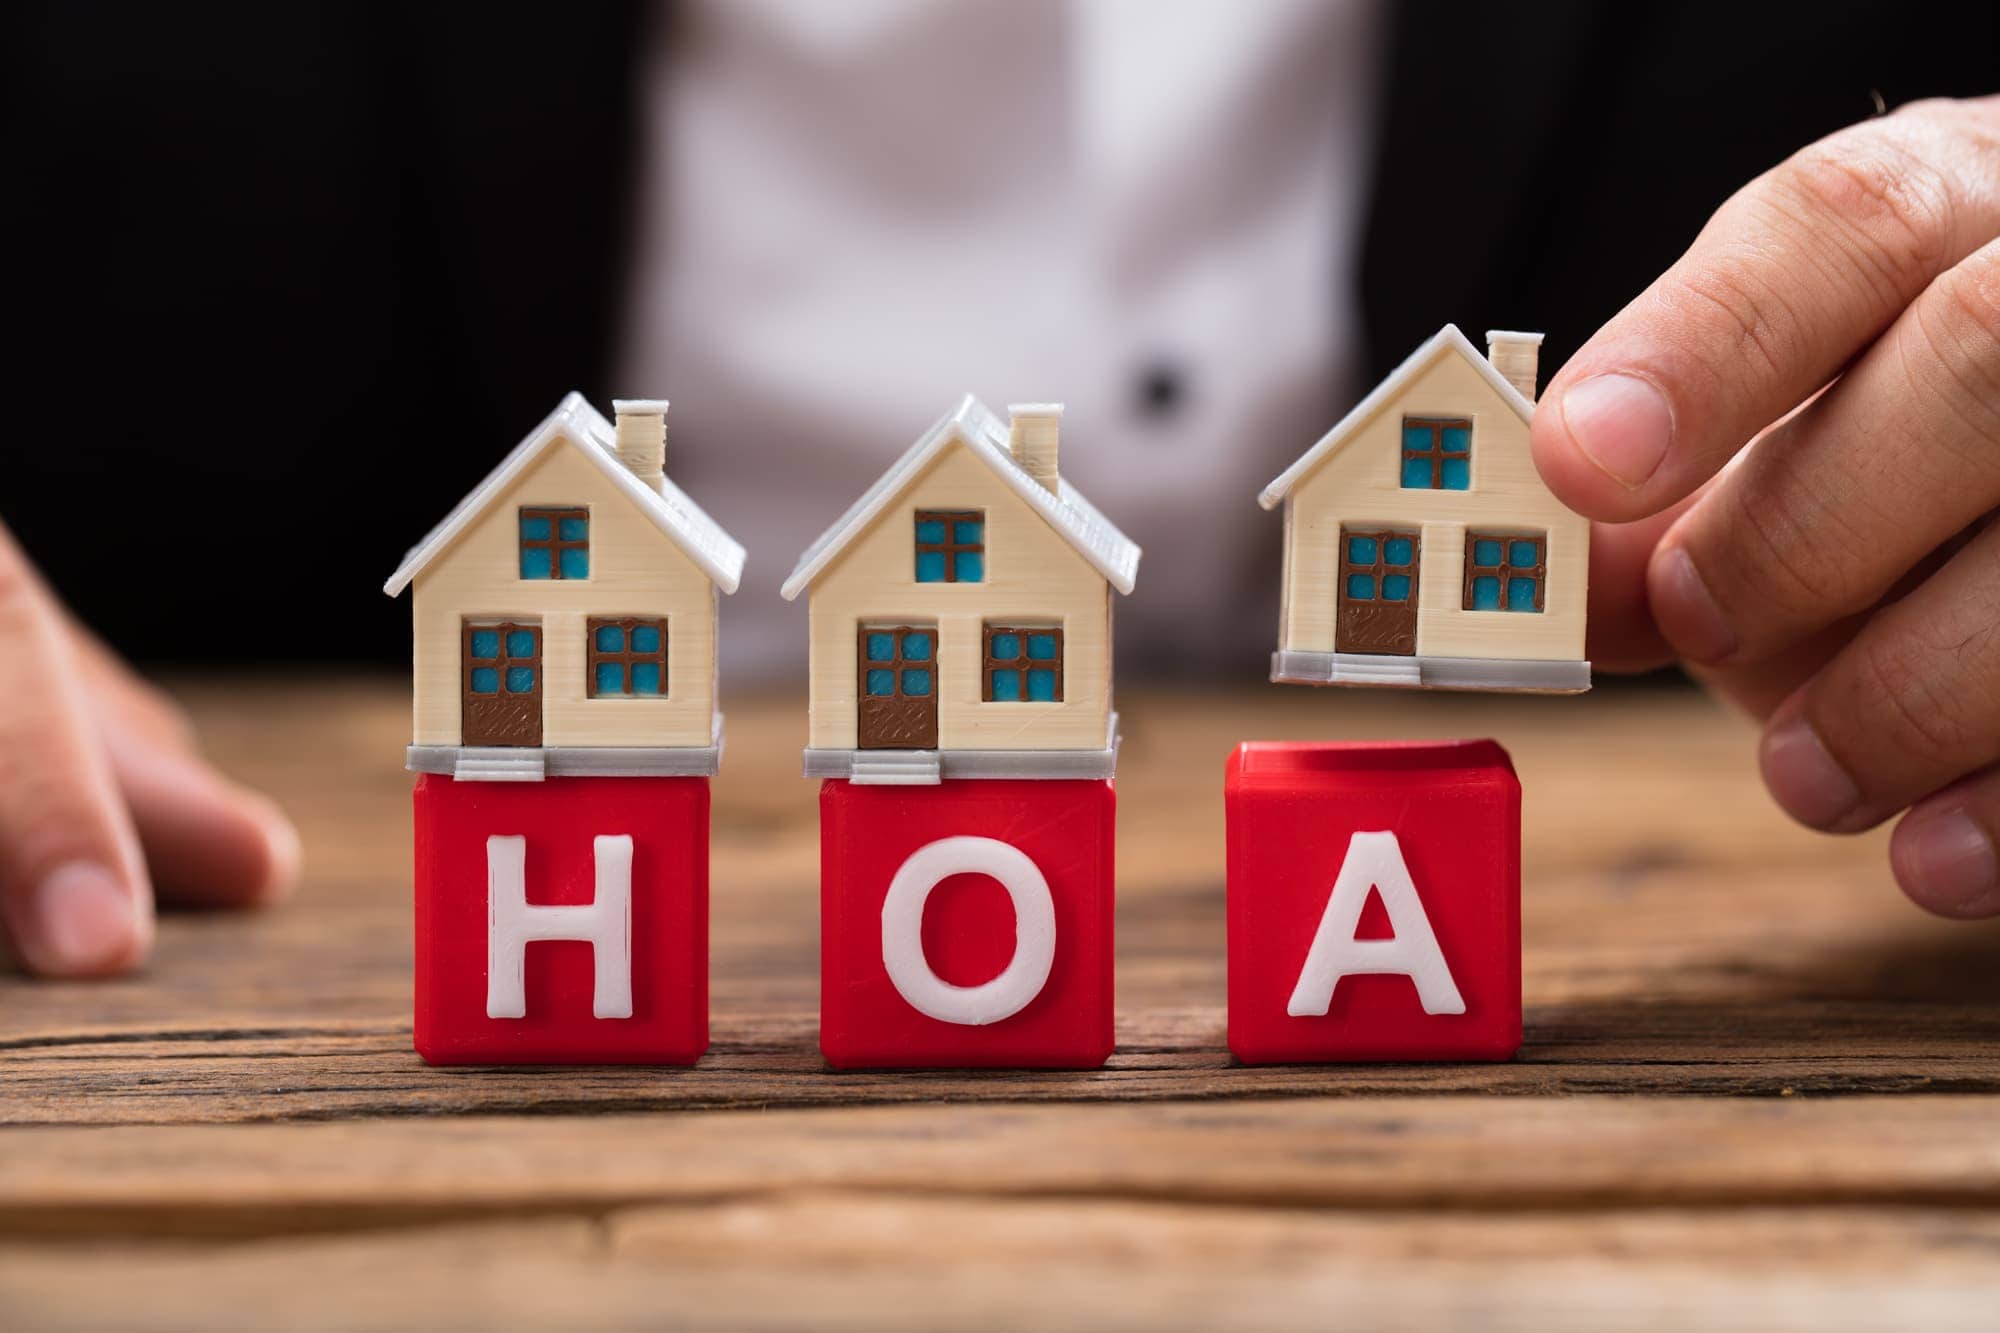 home building affordable housing and hoa covenants